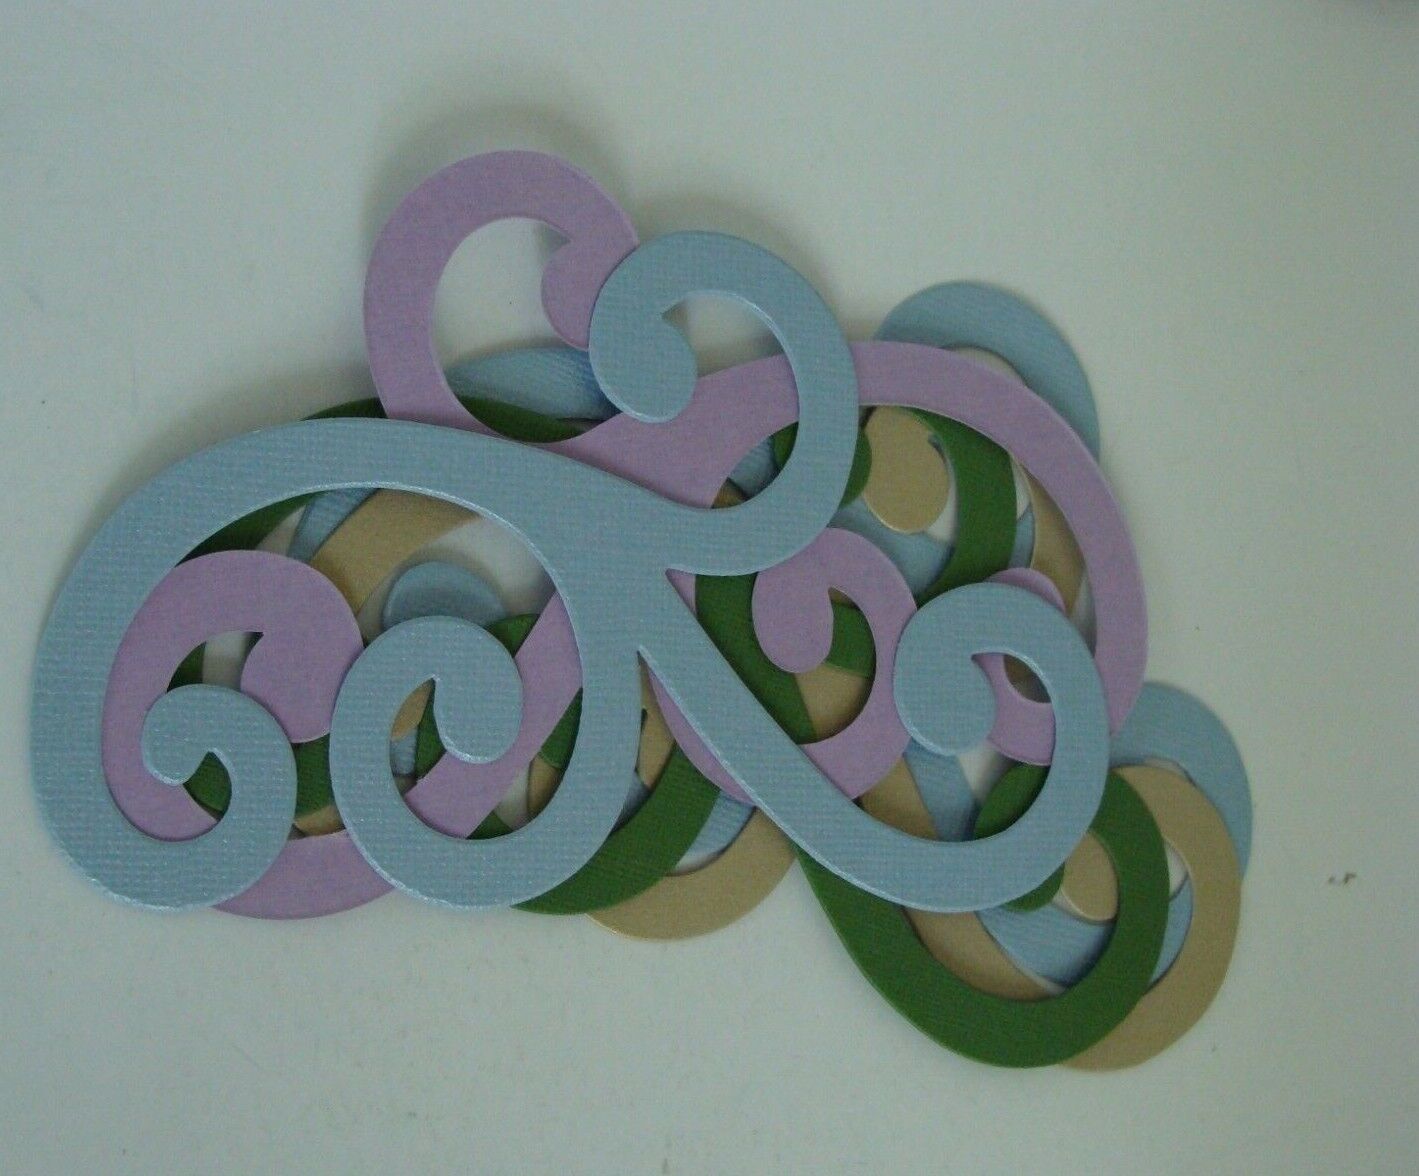 Scrapbooking Supplies Lot Of 5 Craft Paper Pre-cut Swirl Shapes Mixed Colors